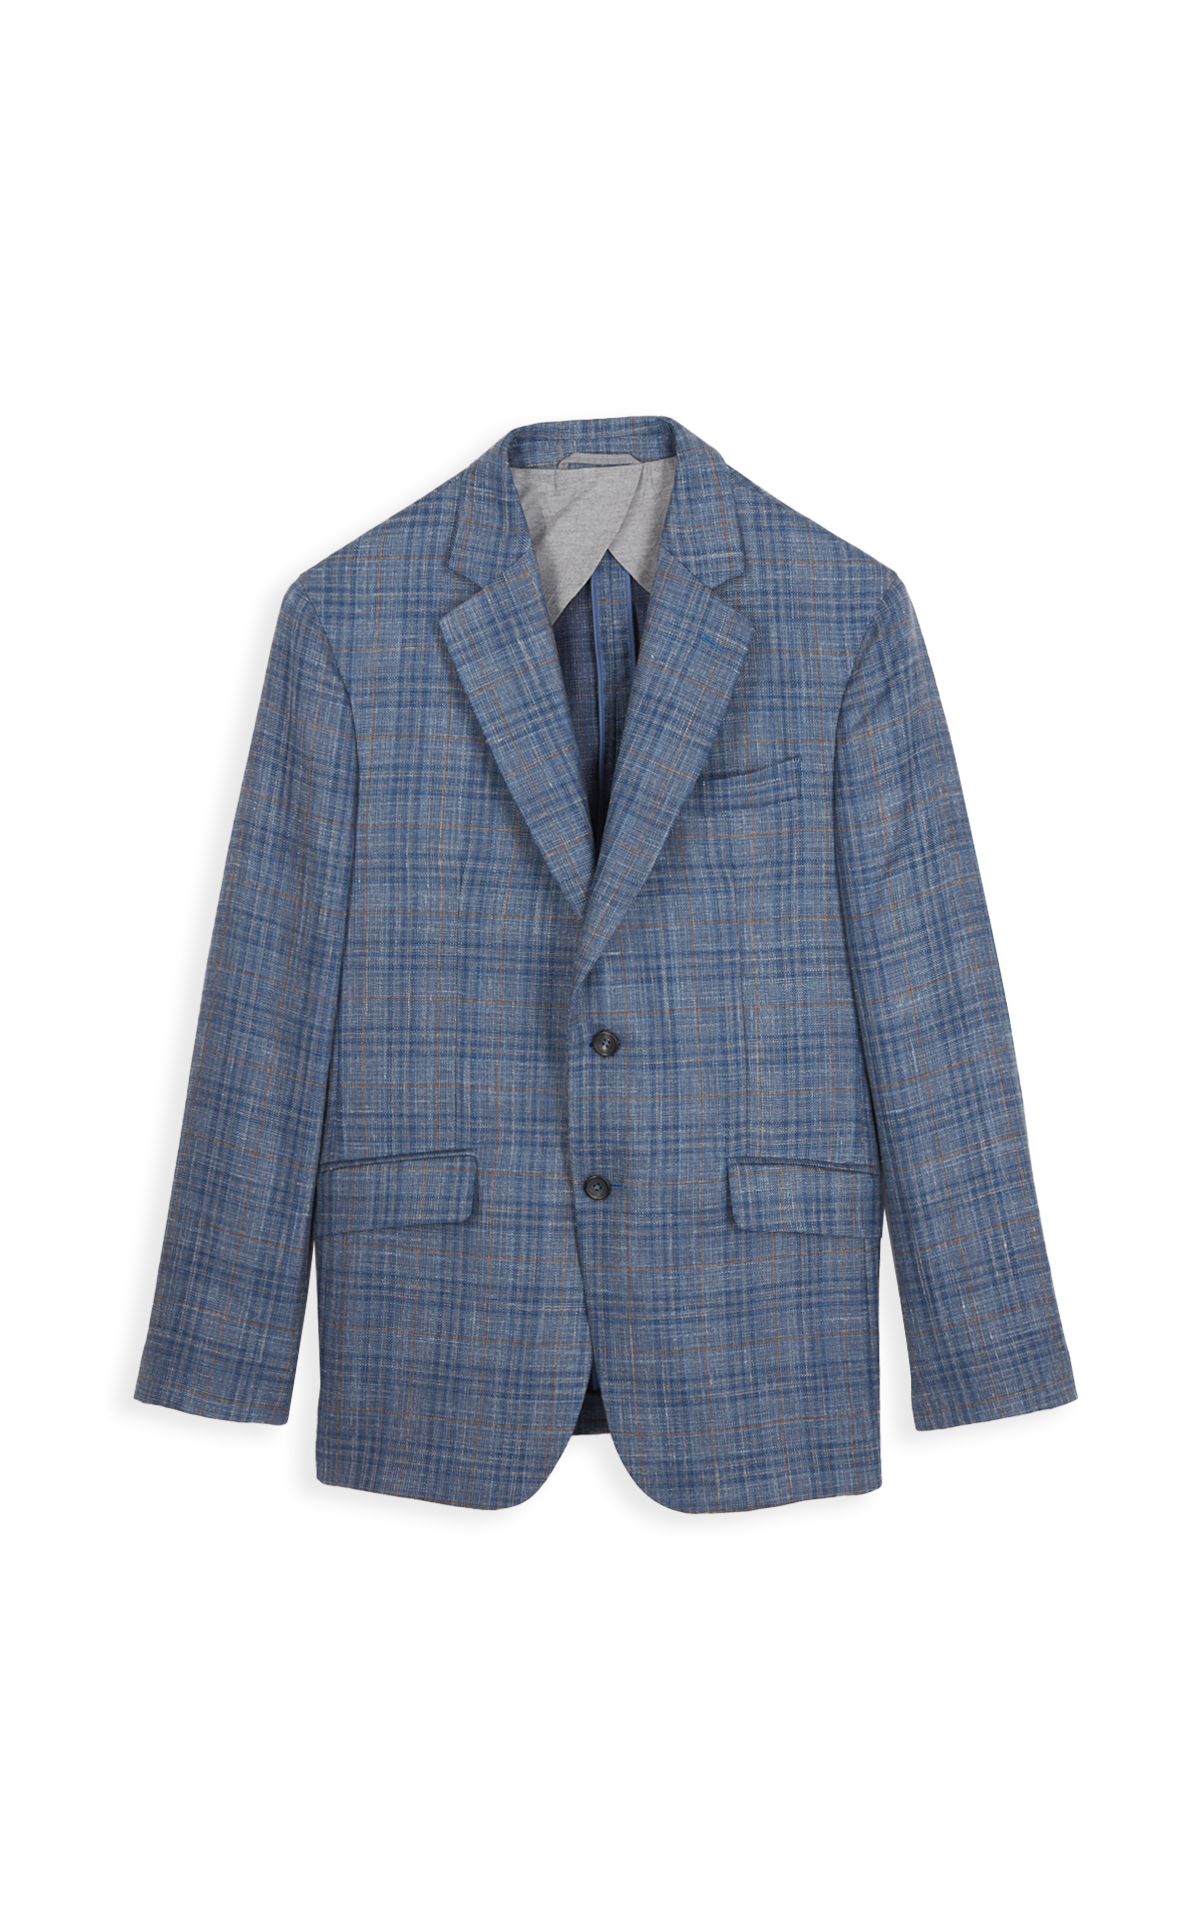 Blue checked jacket